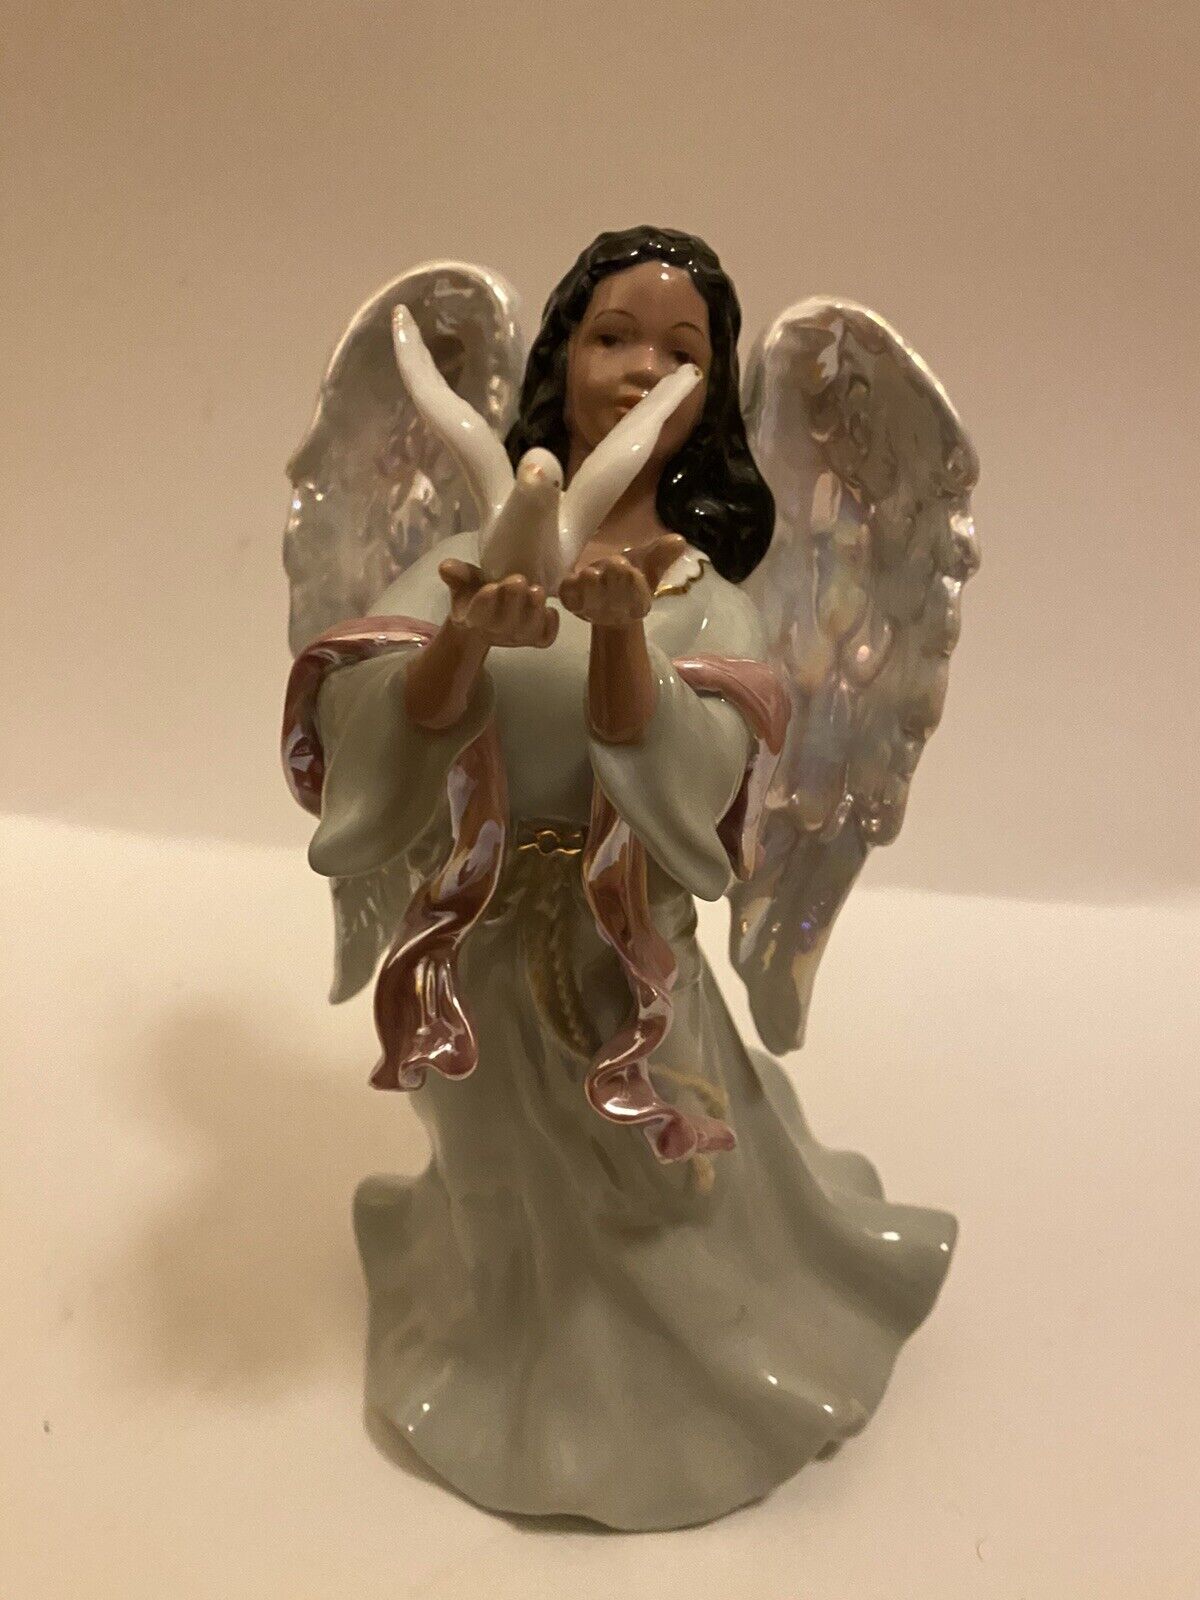 Cosmos 96571 Fine Porcelain African American Angel Musical Figurine 9-1/8-Inch